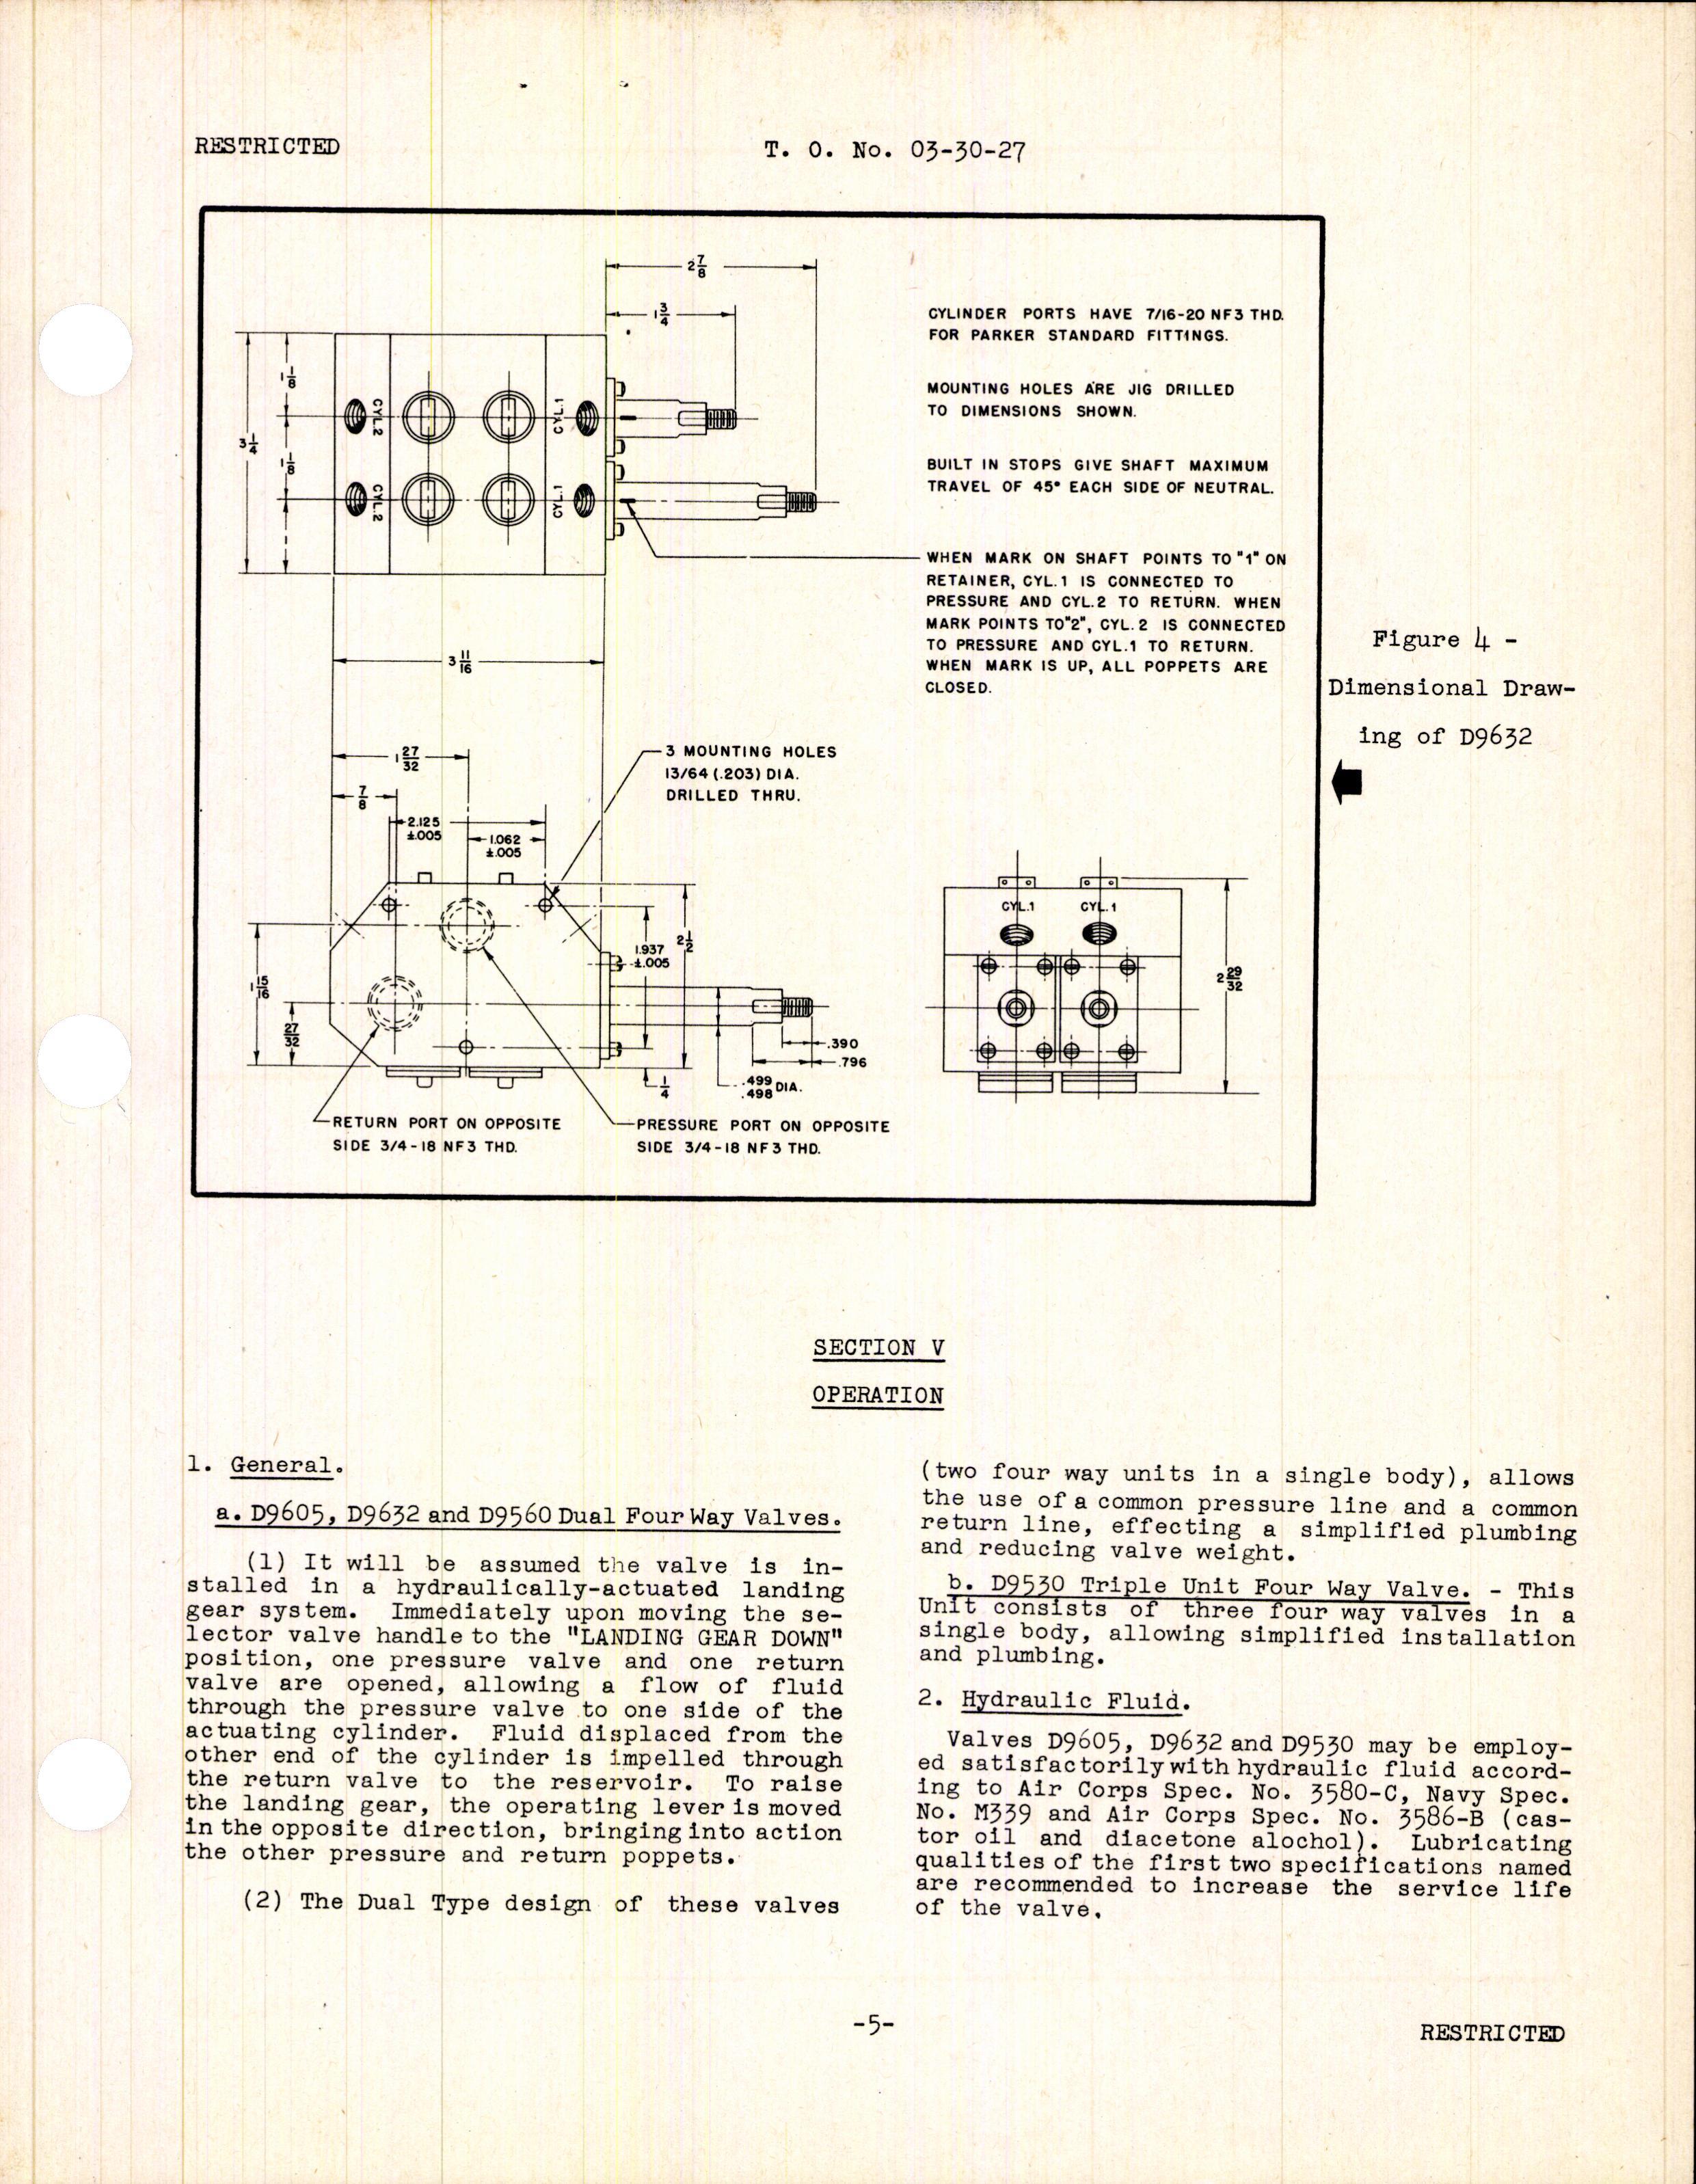 Sample page 7 from AirCorps Library document: Handbook of Instructions with Parts Catalog for Hydraulic Selector Valves